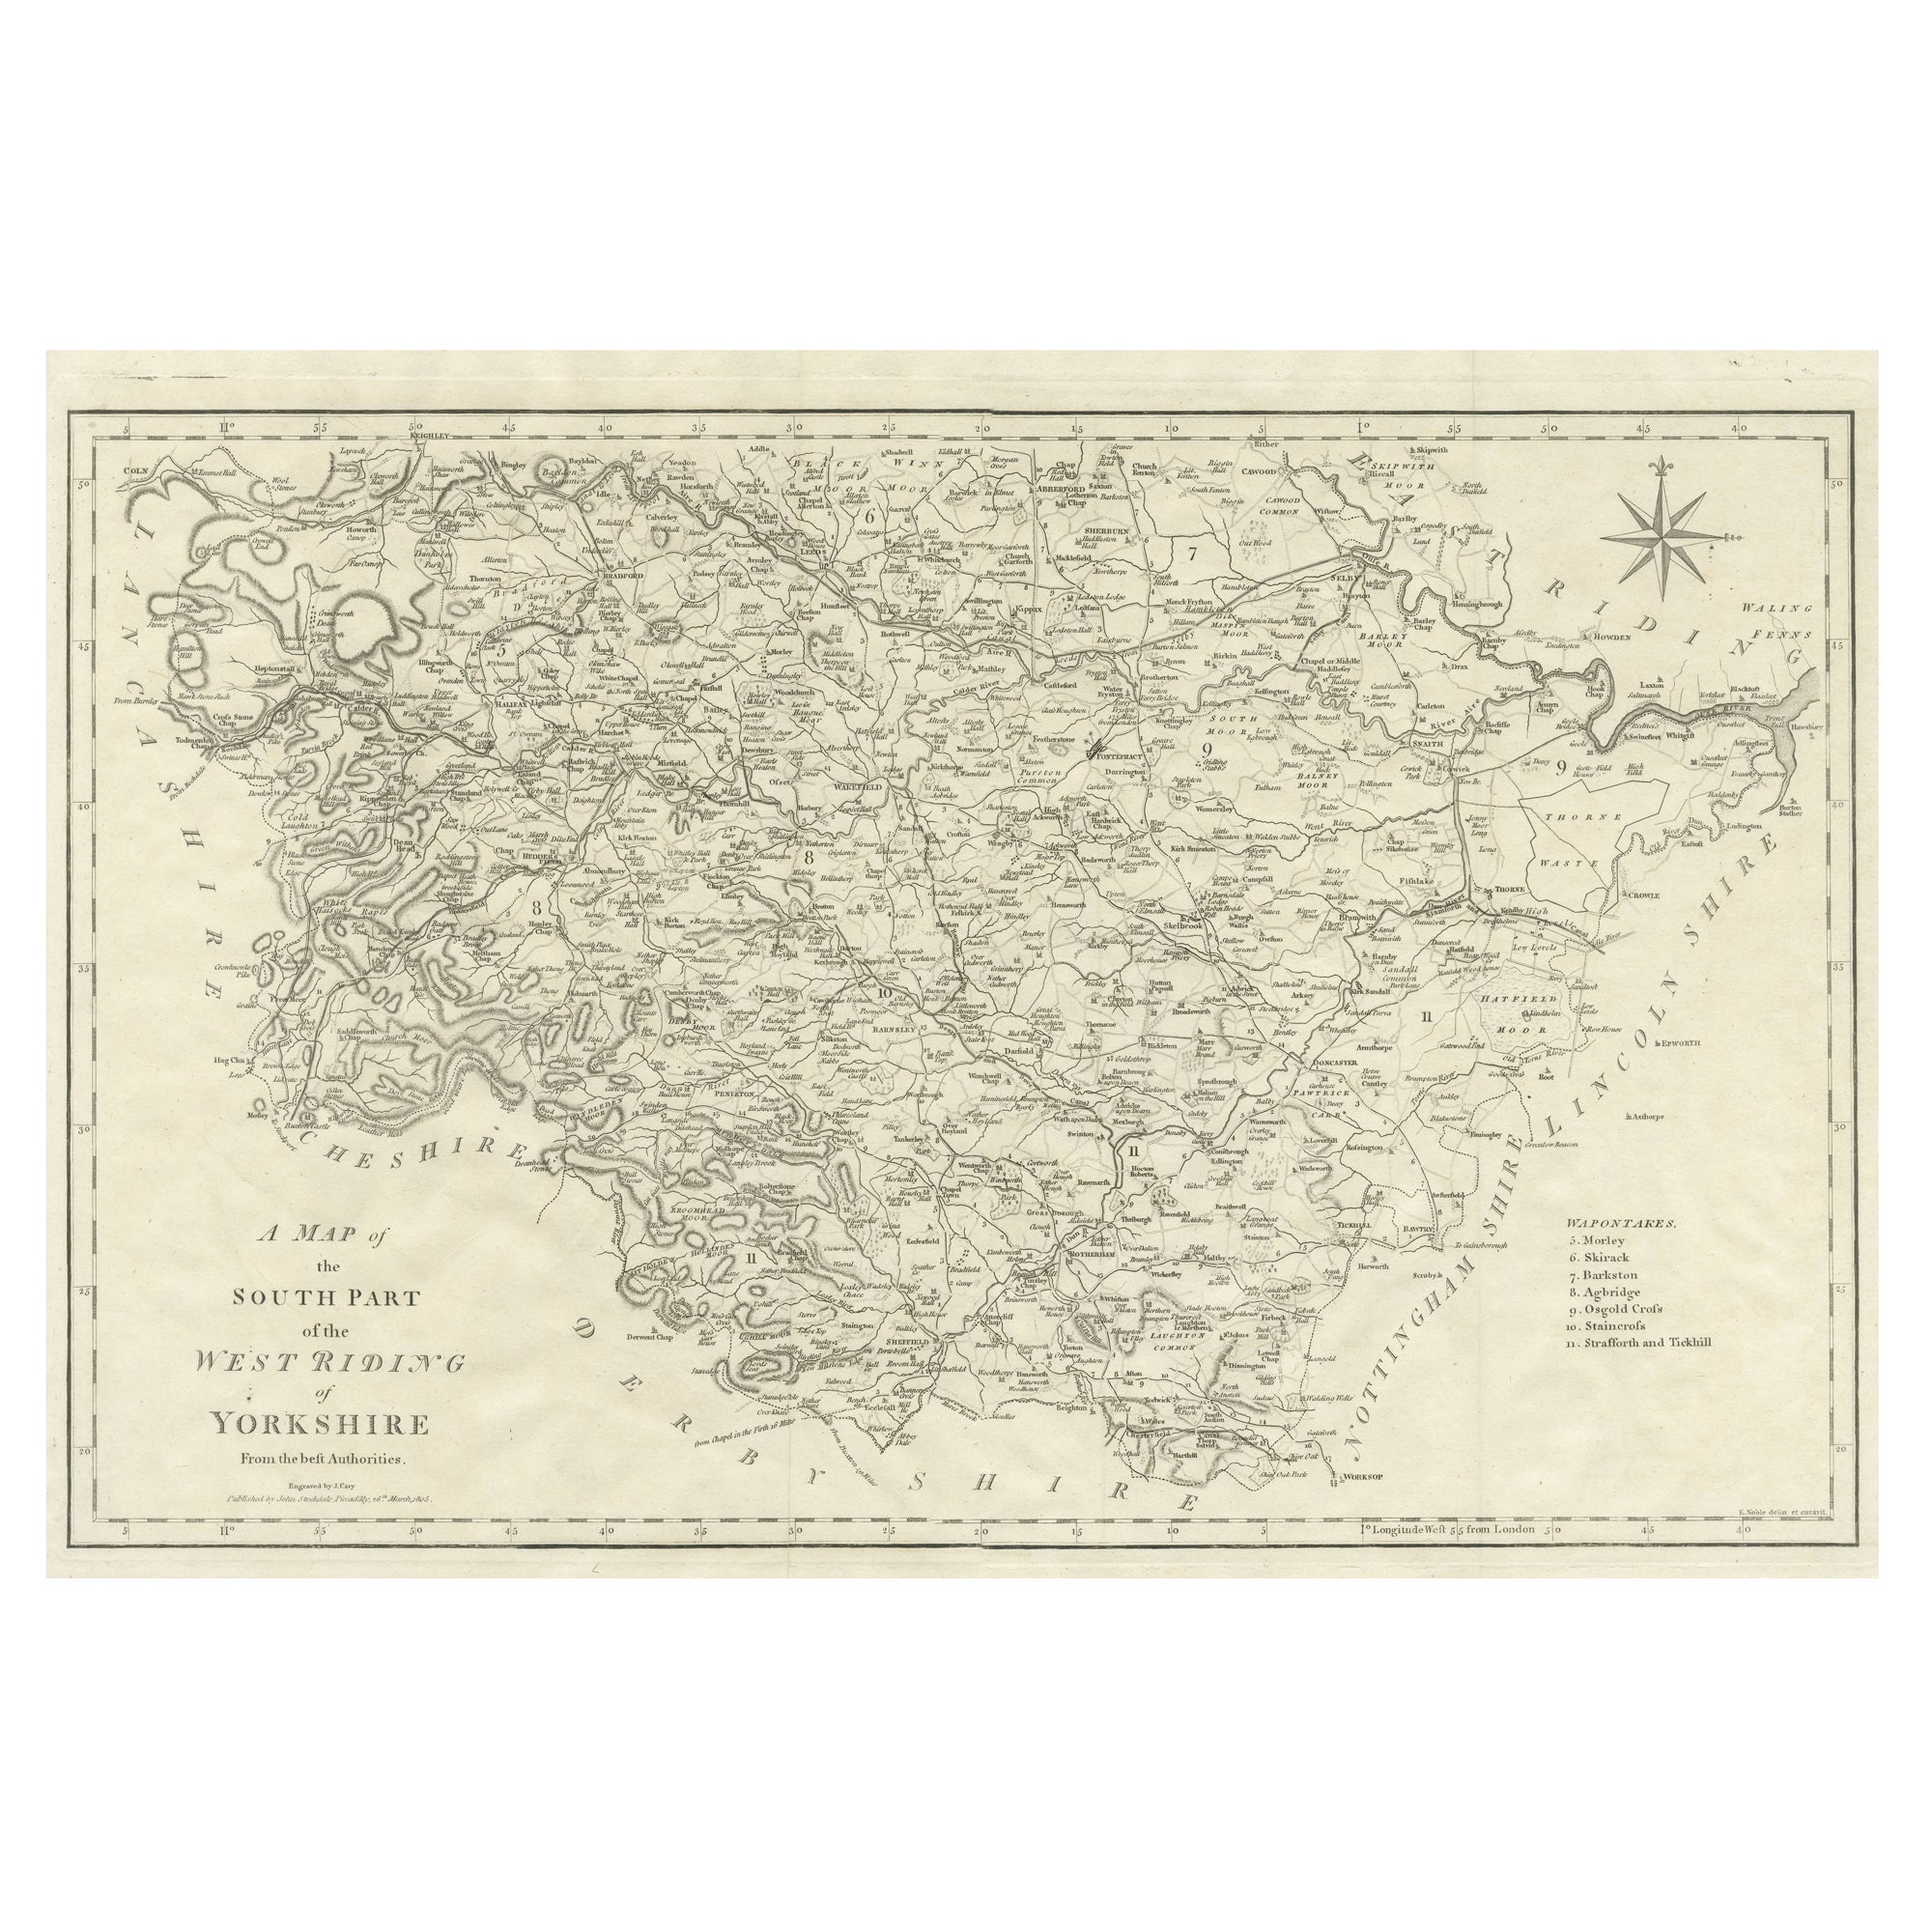 Large Antique County Map of the West Riding of Yorkshire 'South Part', England For Sale